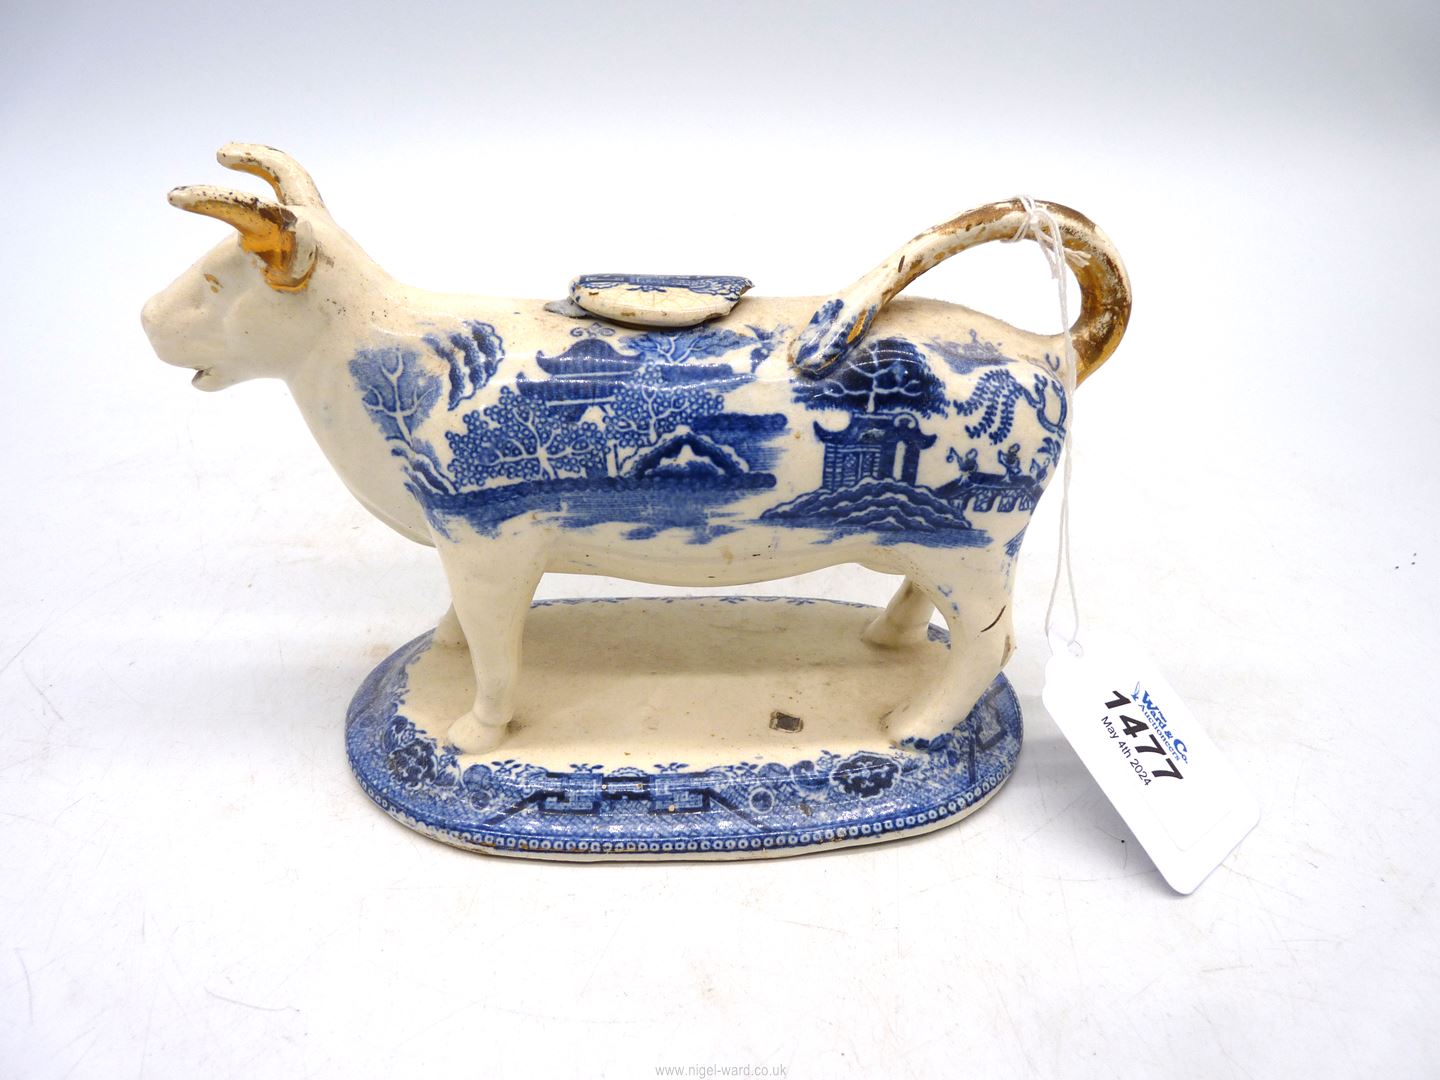 A blue and white willow pattern transfer printed cow creamer, circa 1830,